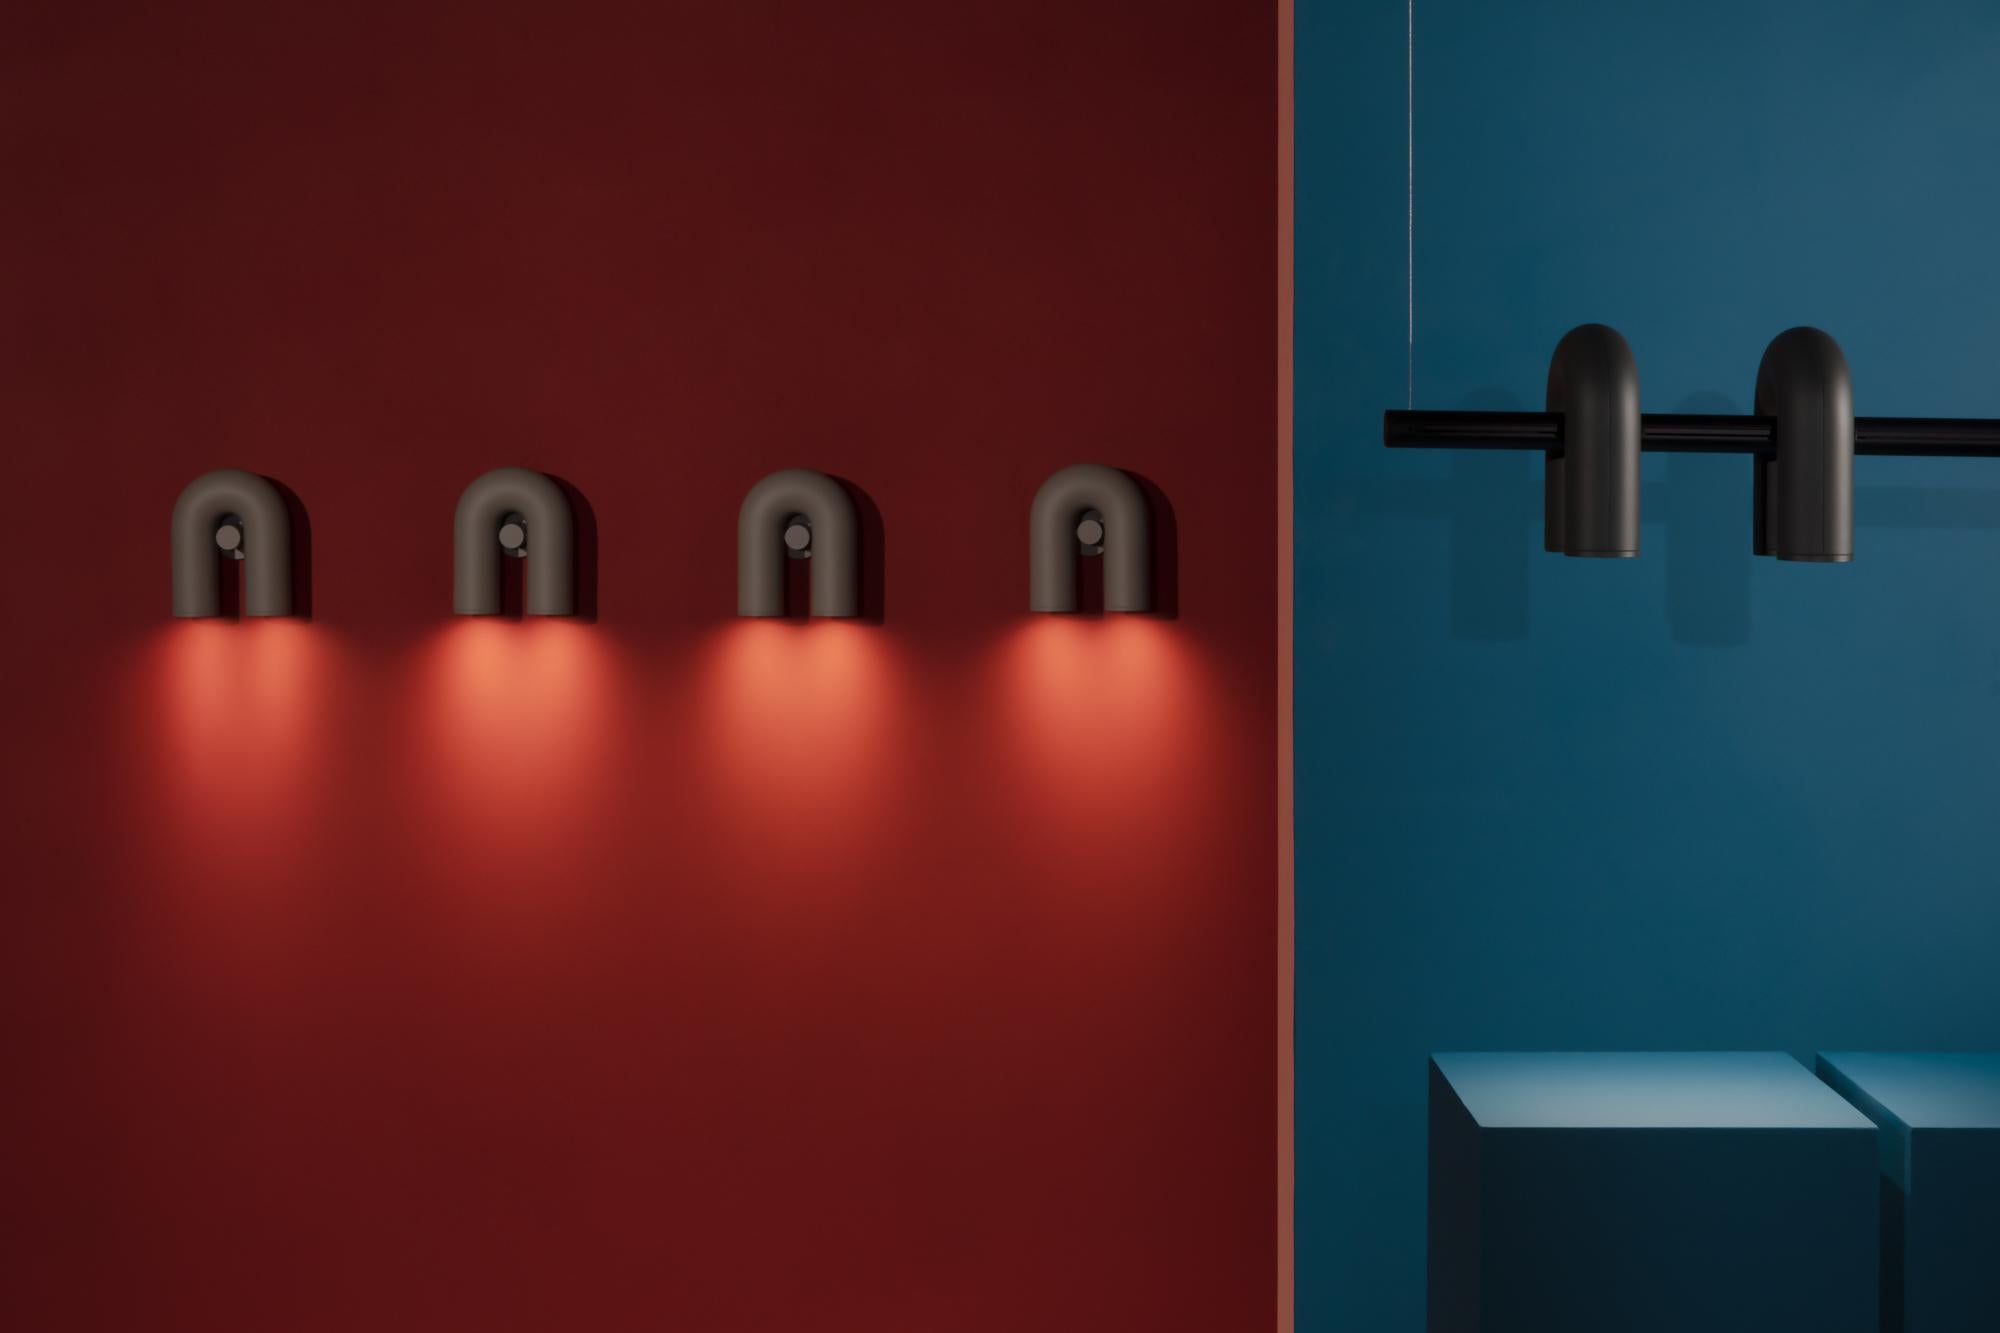 Cirkus wall lamps by AGO Lighting
Coated ABS, aluminum

UL Listed
LED GU10 110-240V (not included)

Four colors available: Charcoal, grey, green, terracotta
Dimensions: 18 x 14,8 x 7,8 cm


AGO is a Korean design studio specialized in lighting. AGO